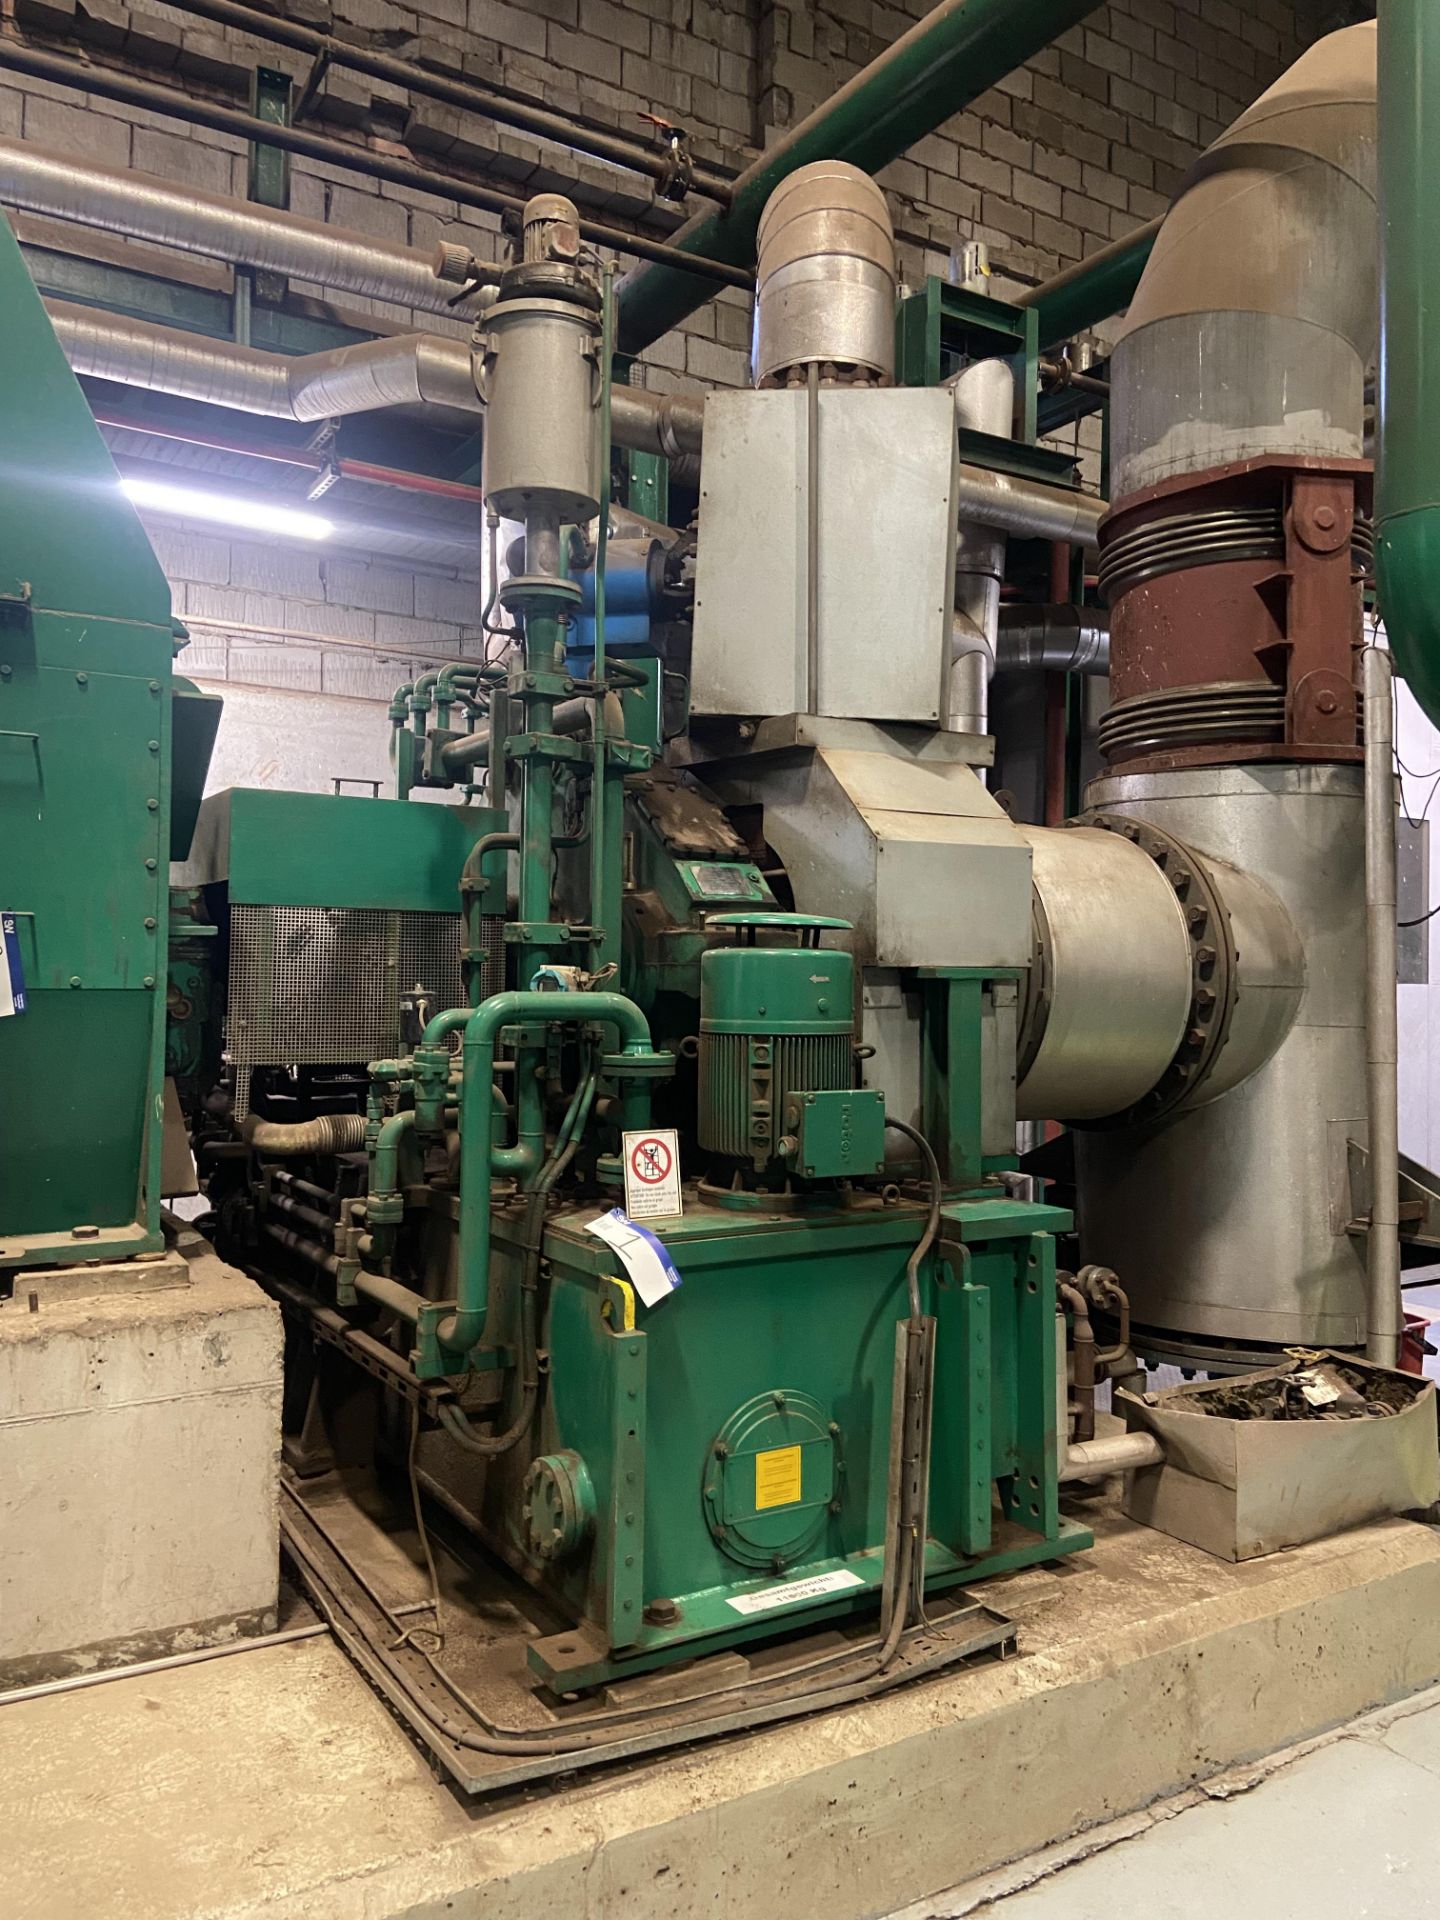 Siemens TWIN-CA36 STEAM TURBINE, serial no. 4.736.023, year of manufacture 2008, output 3119kW (